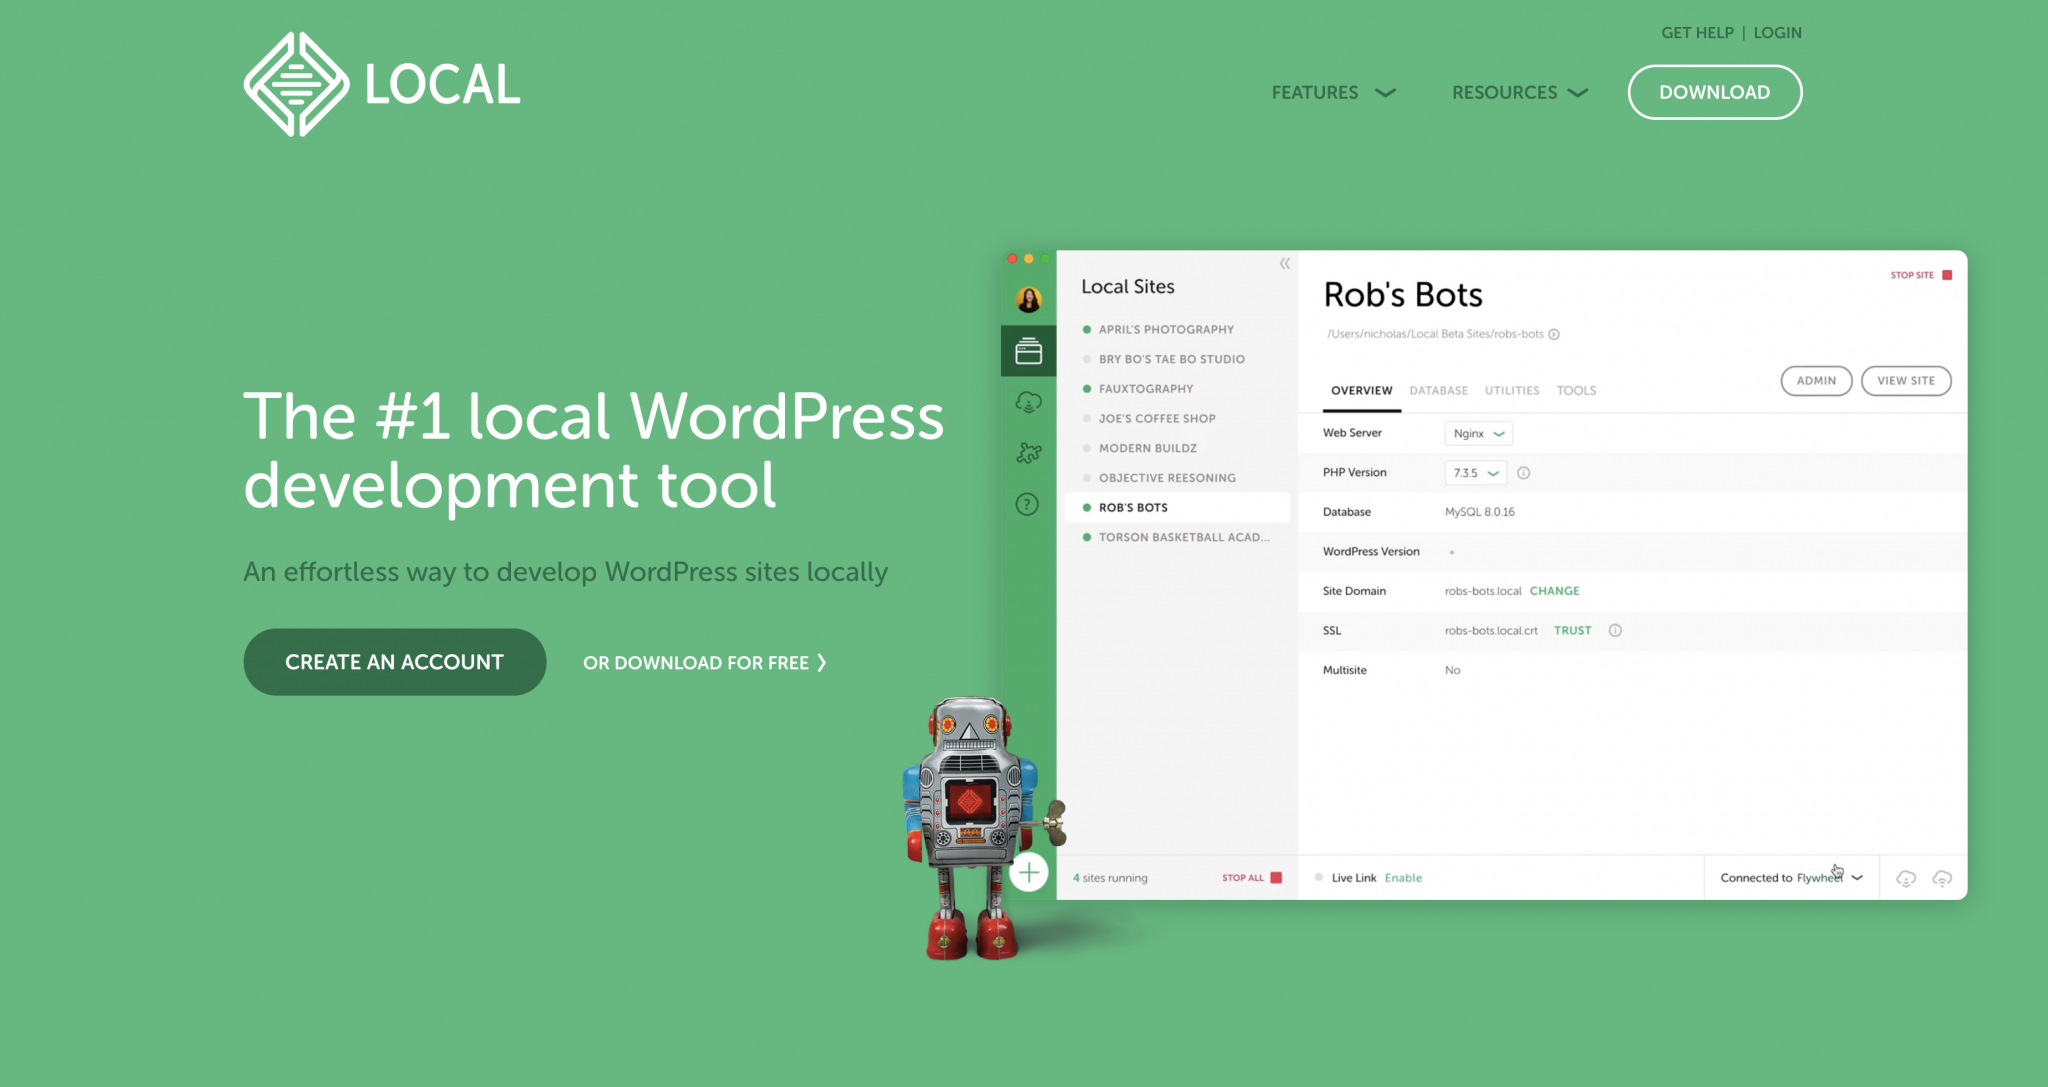 Local is the #1 local WordPress development tool to install WP on your computer.